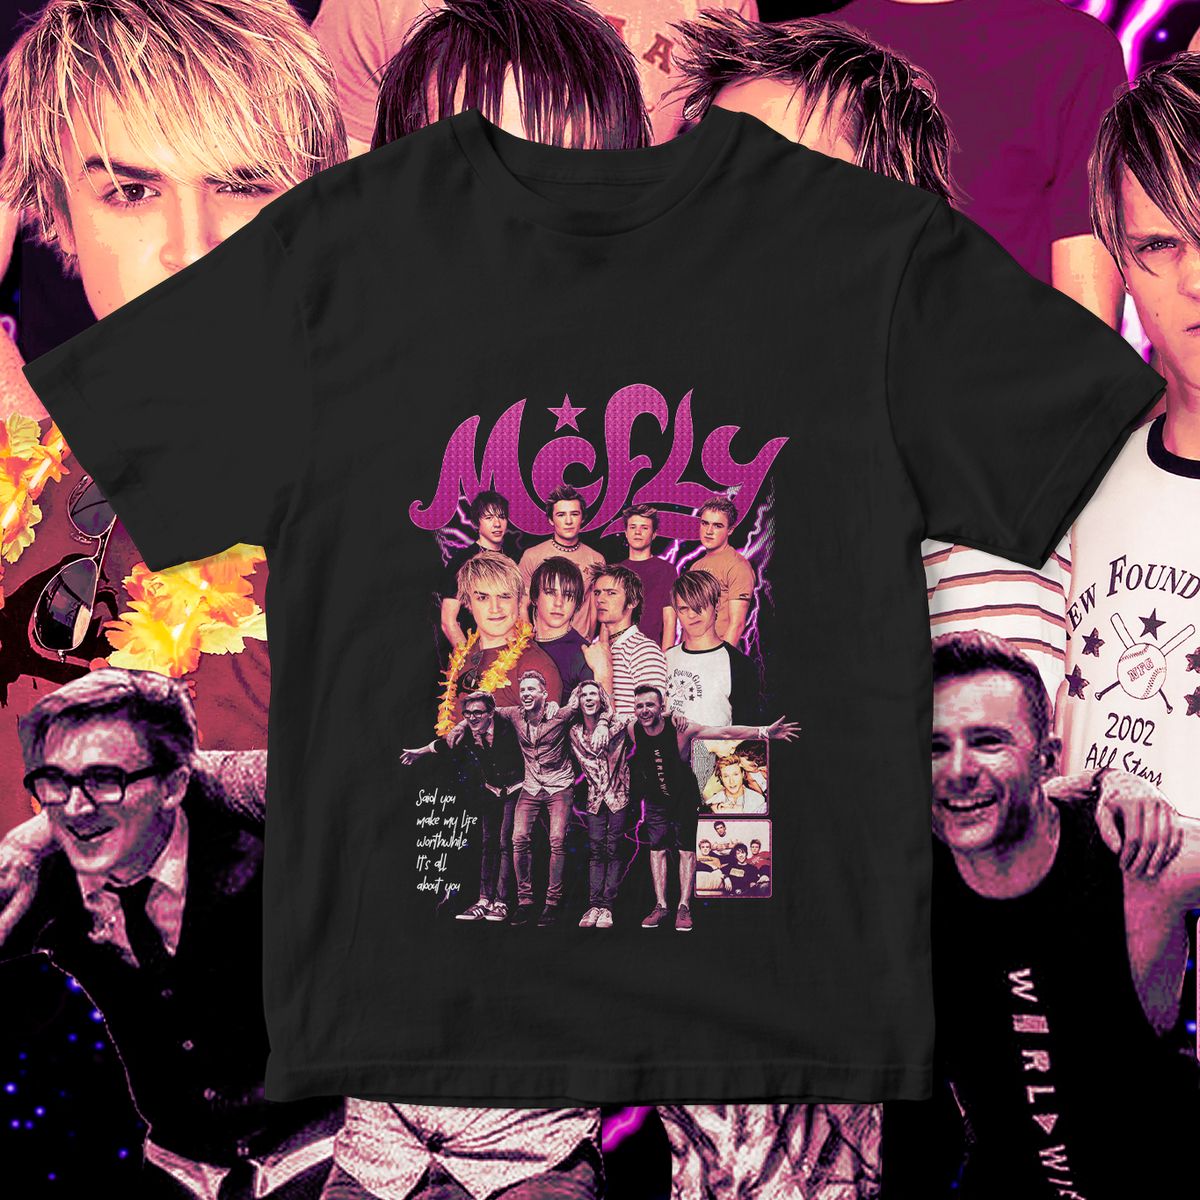 Nome do produto: Mcfly - all about you